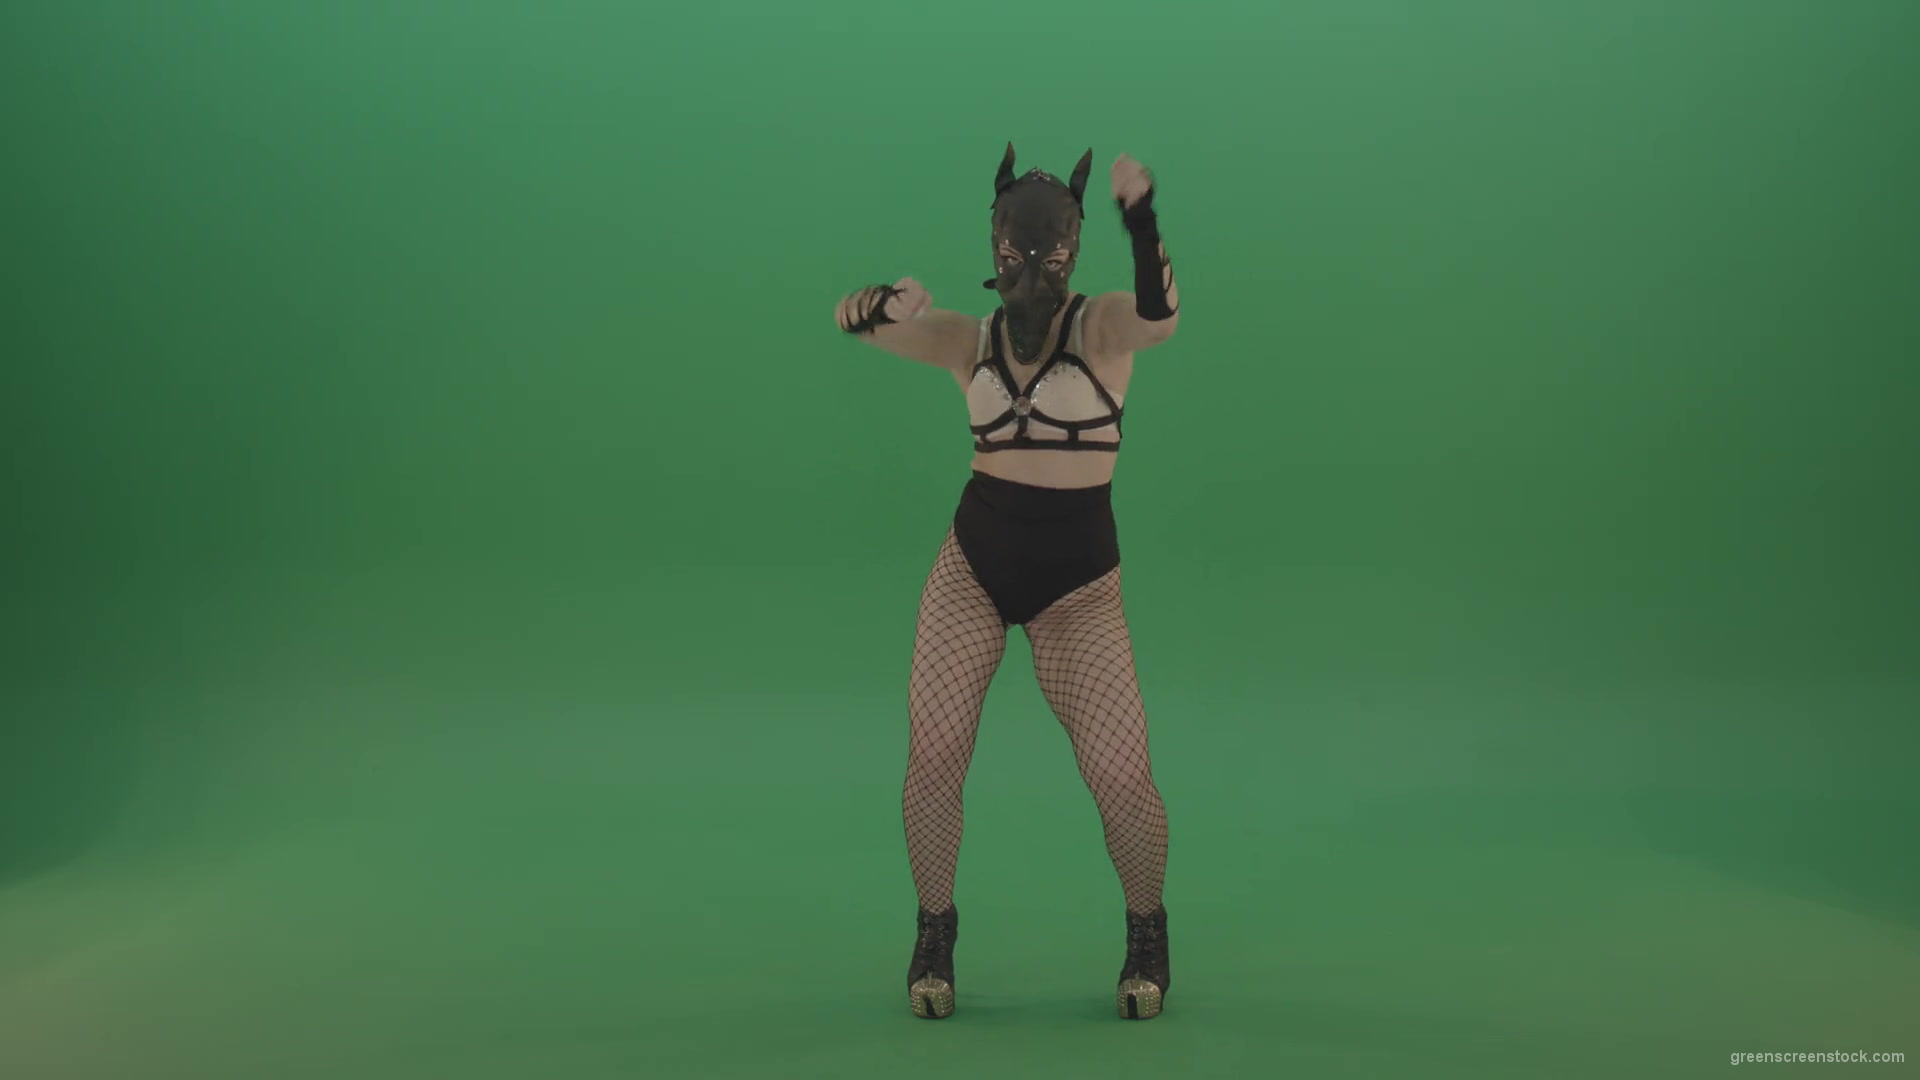 Girl-in-wolf-fetish-mask-sit-down-and-stand-up-making-hand-beat-on-green-screen-1920_004 Green Screen Stock